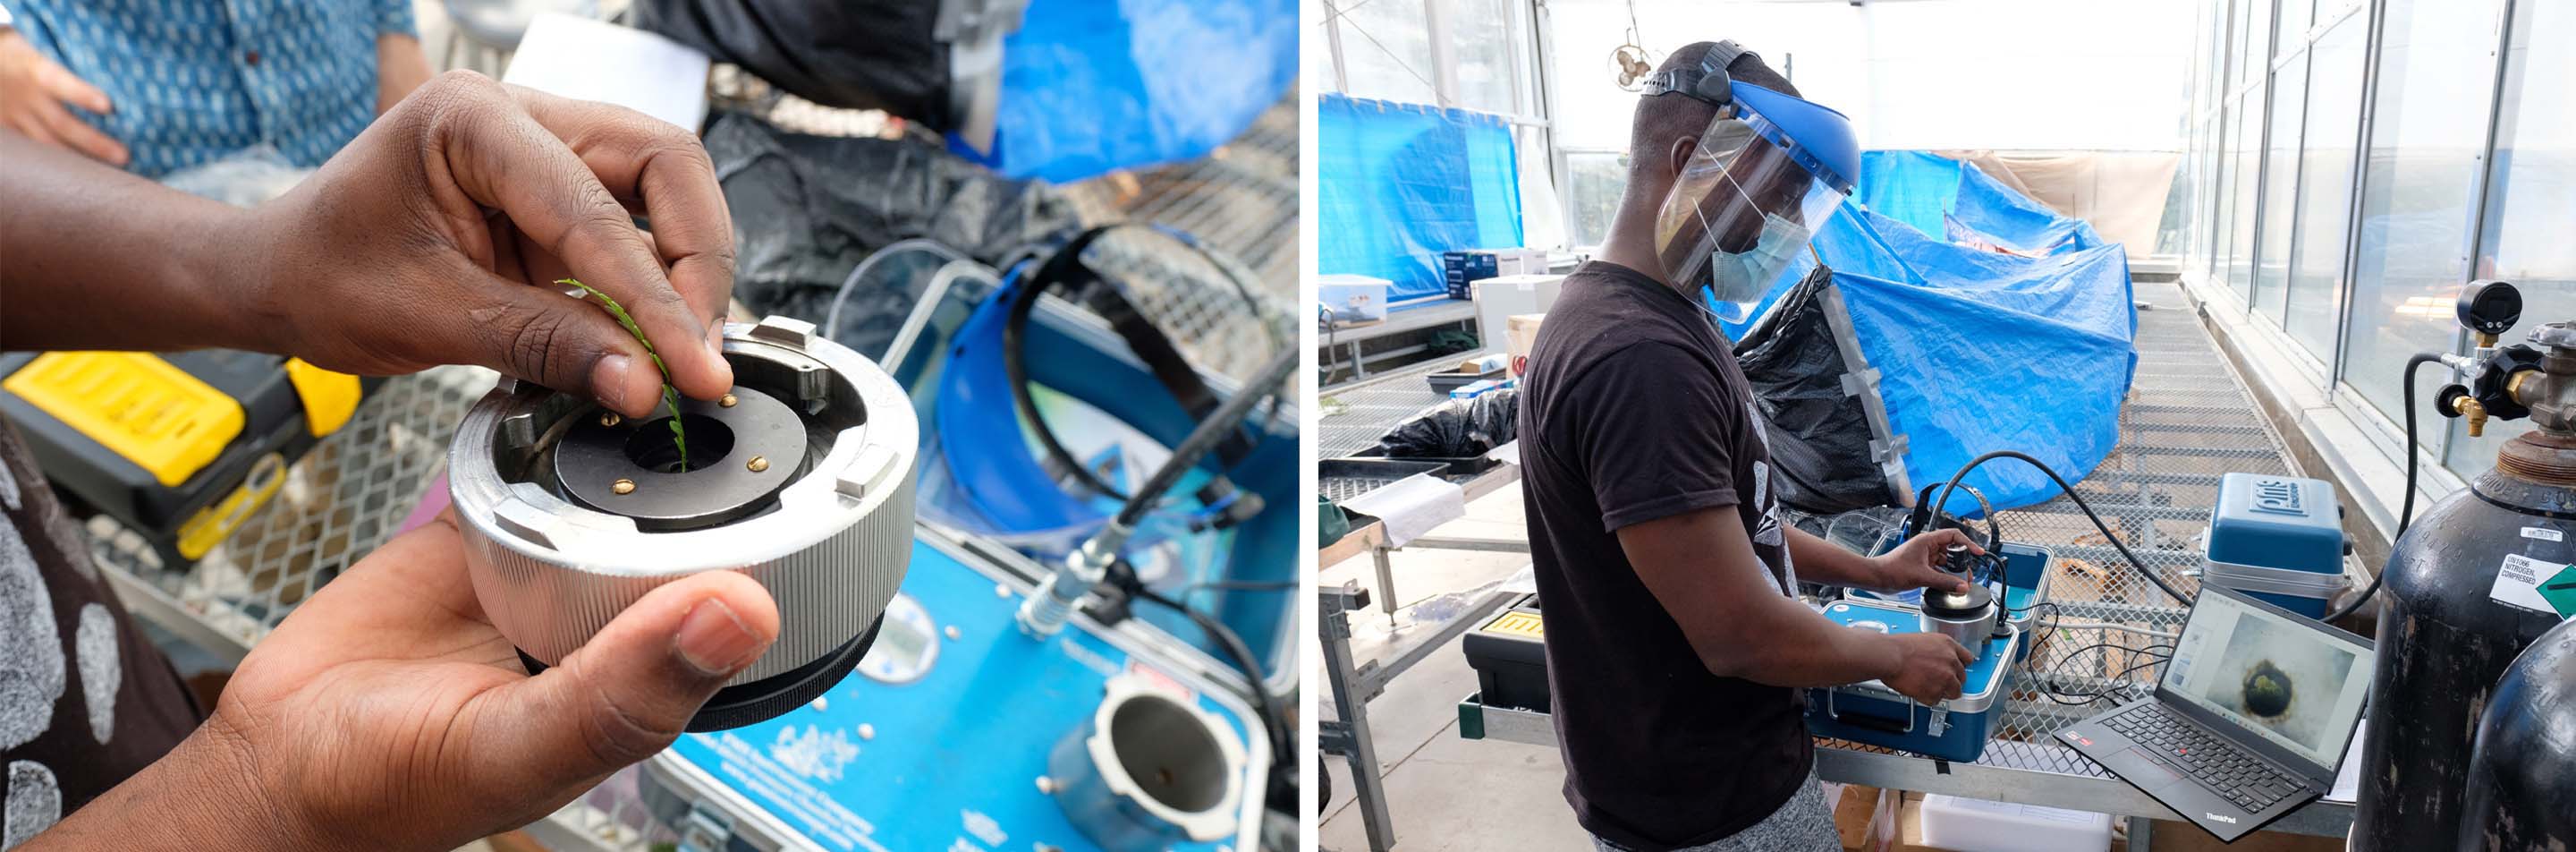 Boakye places the sample into a pressure chamber to measure its water potential